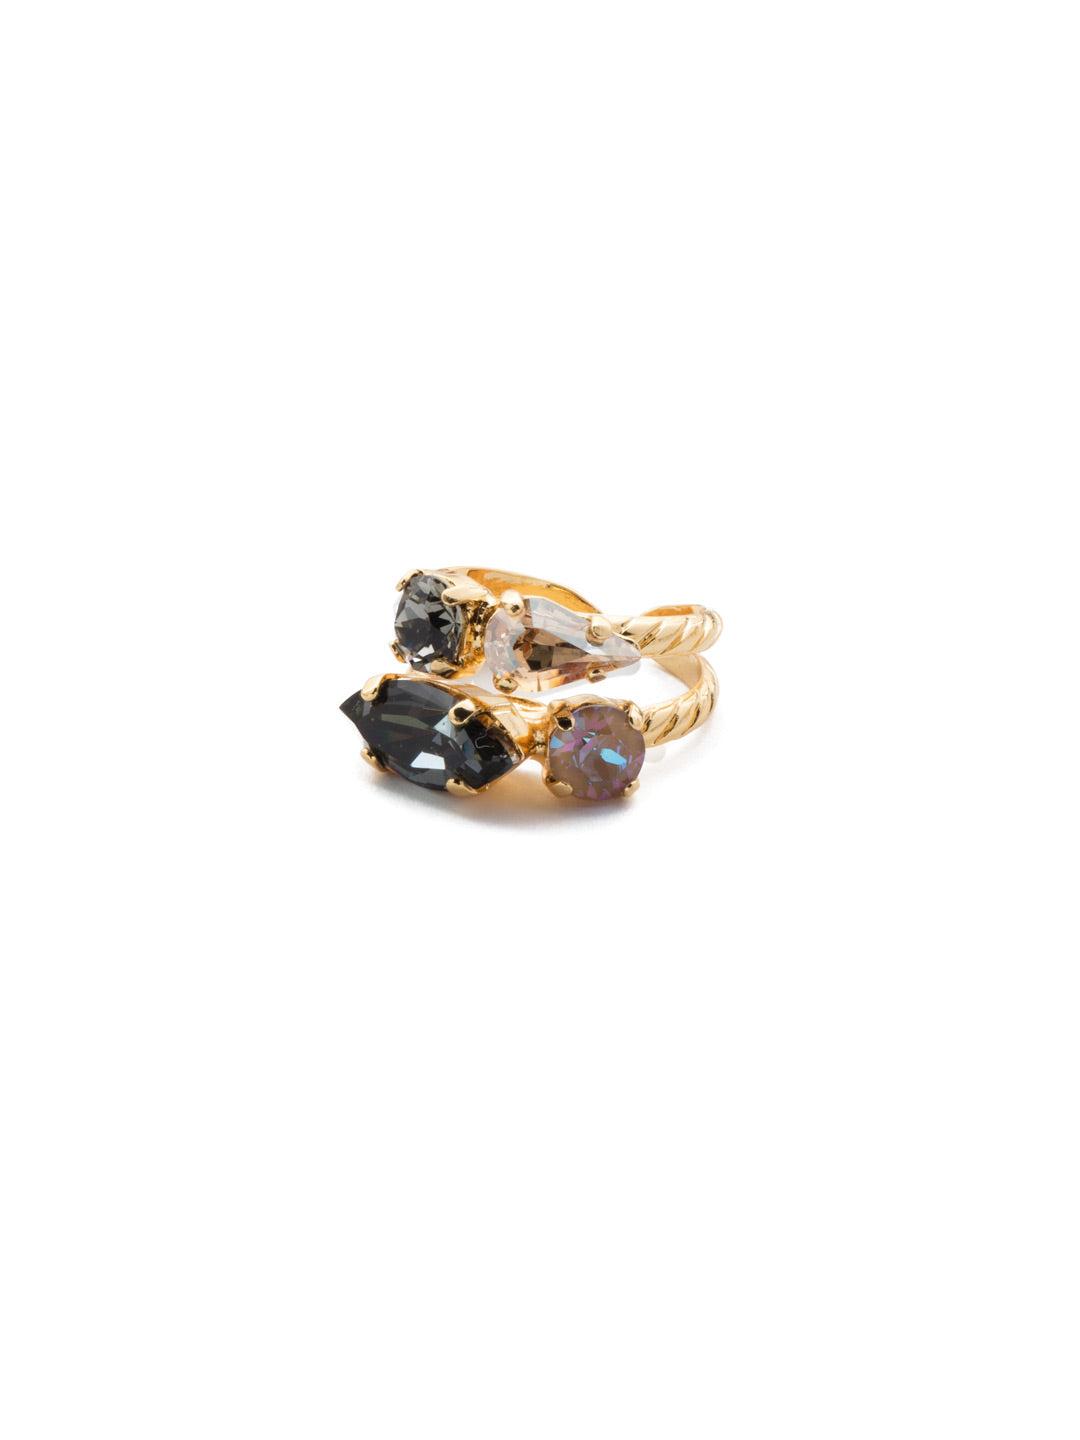 Mayzel Stacked Ring - RET1BGCSM - The Mayzel Stacked Ring goes bold when it comes to sparkle. Slip it on and get flashy with navette, pear and round crystals. From Sorrelli's Cashmere collection in our Bright Gold-tone finish.